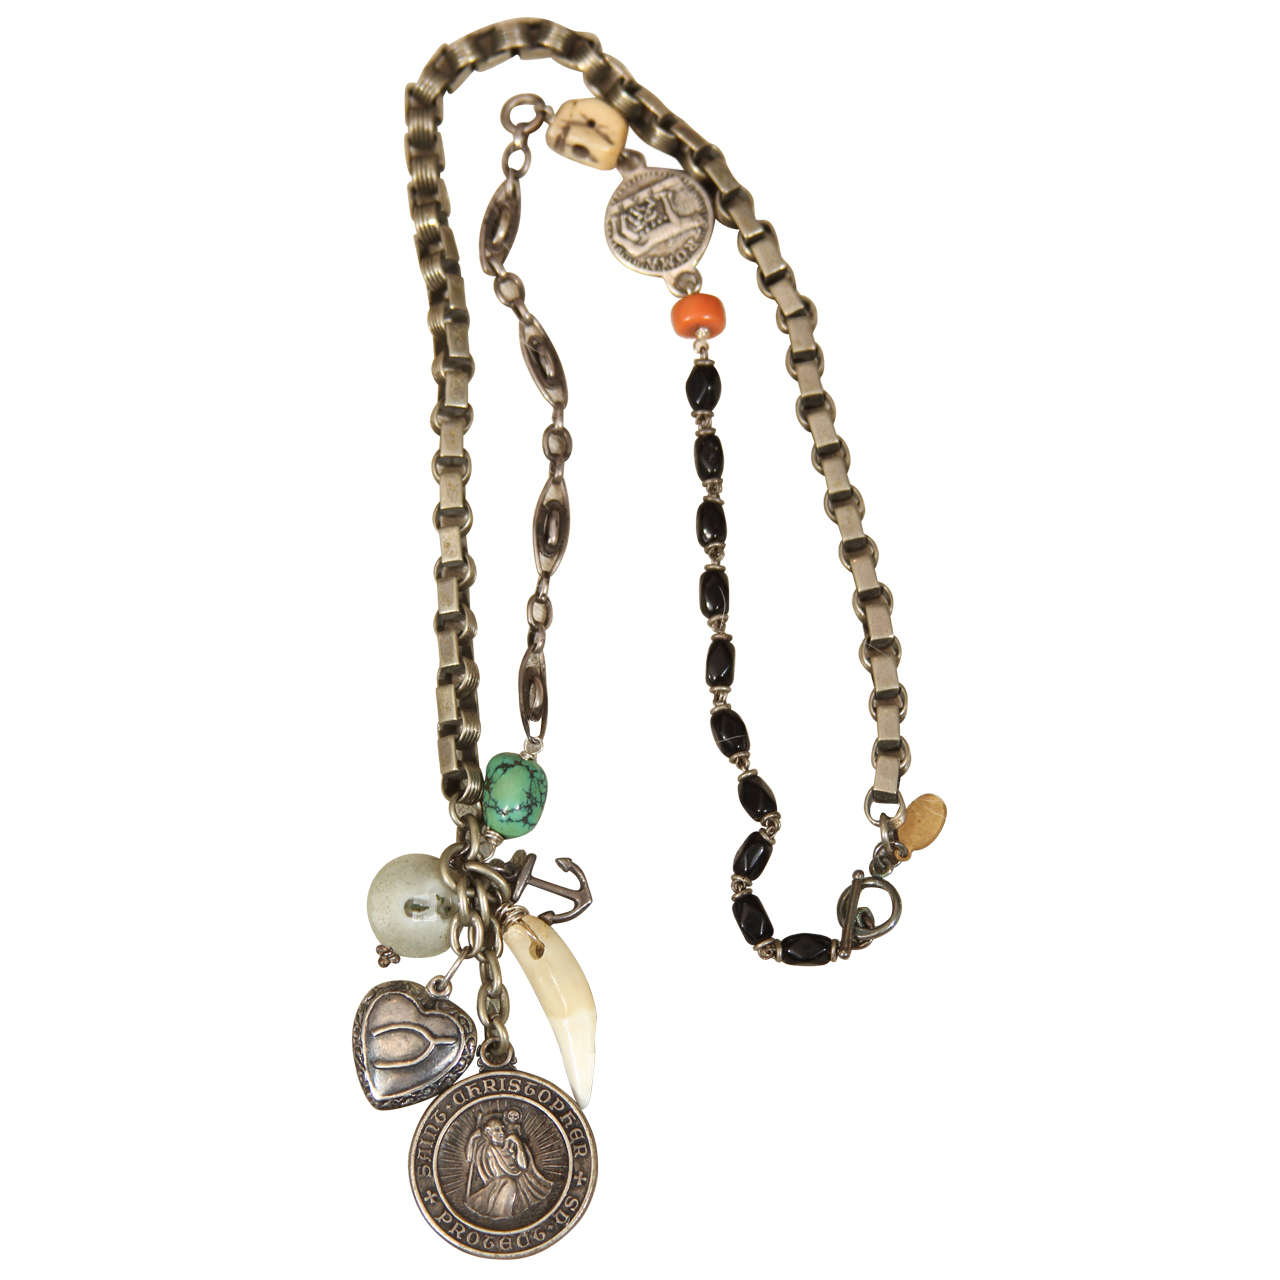 St. Christopher Travelers Necklace